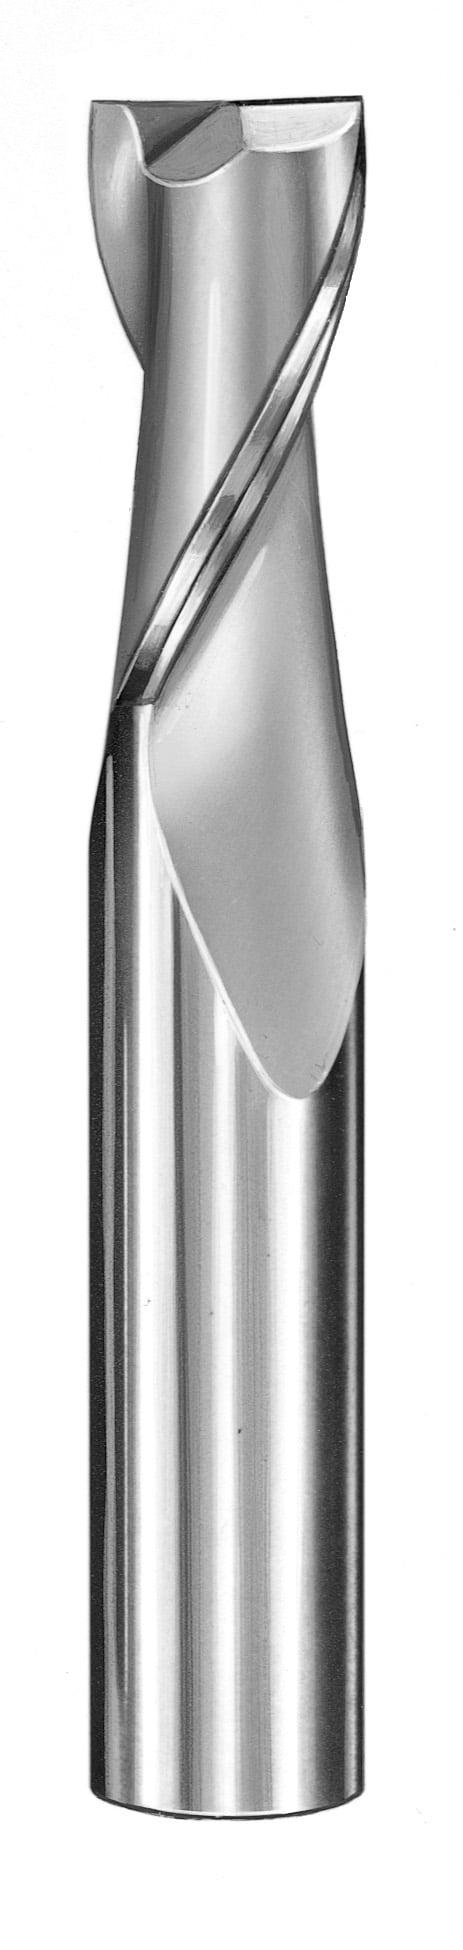 29/64" Dia, 2 Flute, Square End End Mill - 30357